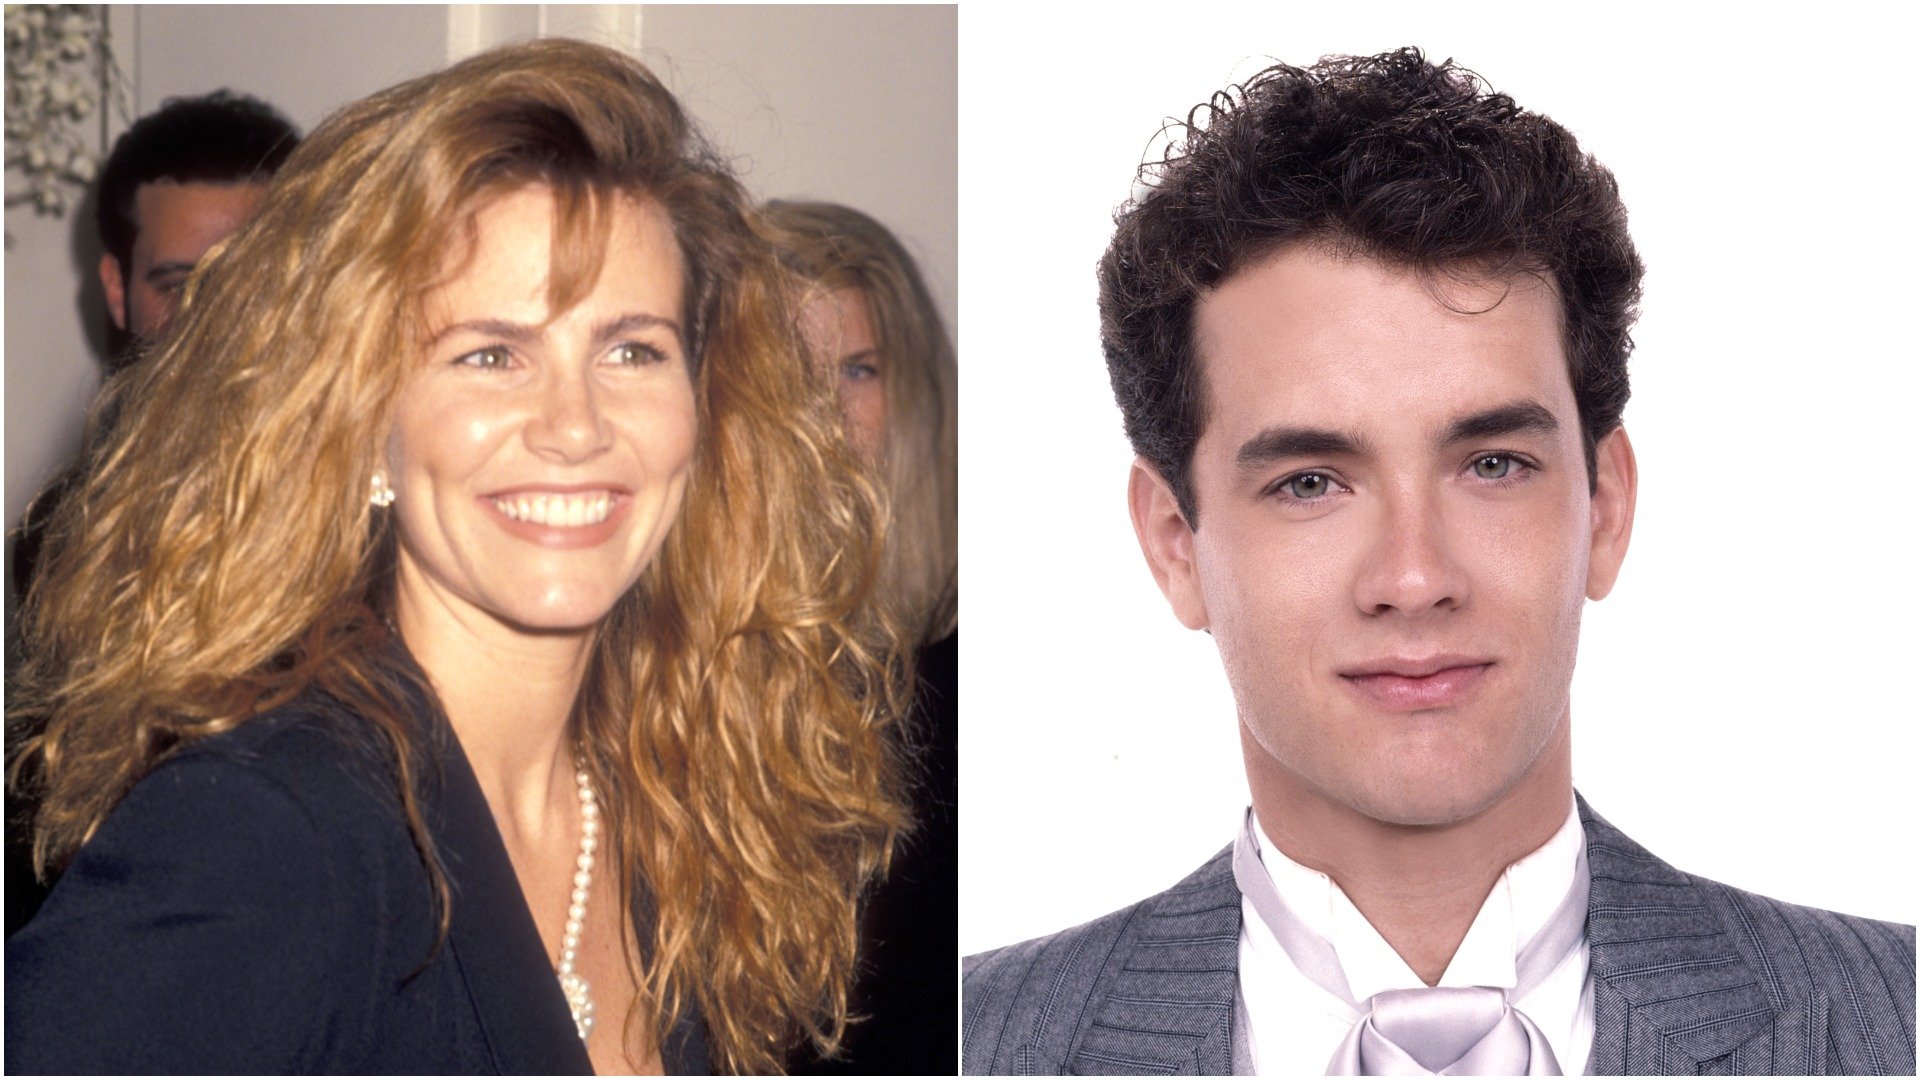 Tawny Kitaen hoped to do another Bachelor Party film with Tom Hanks